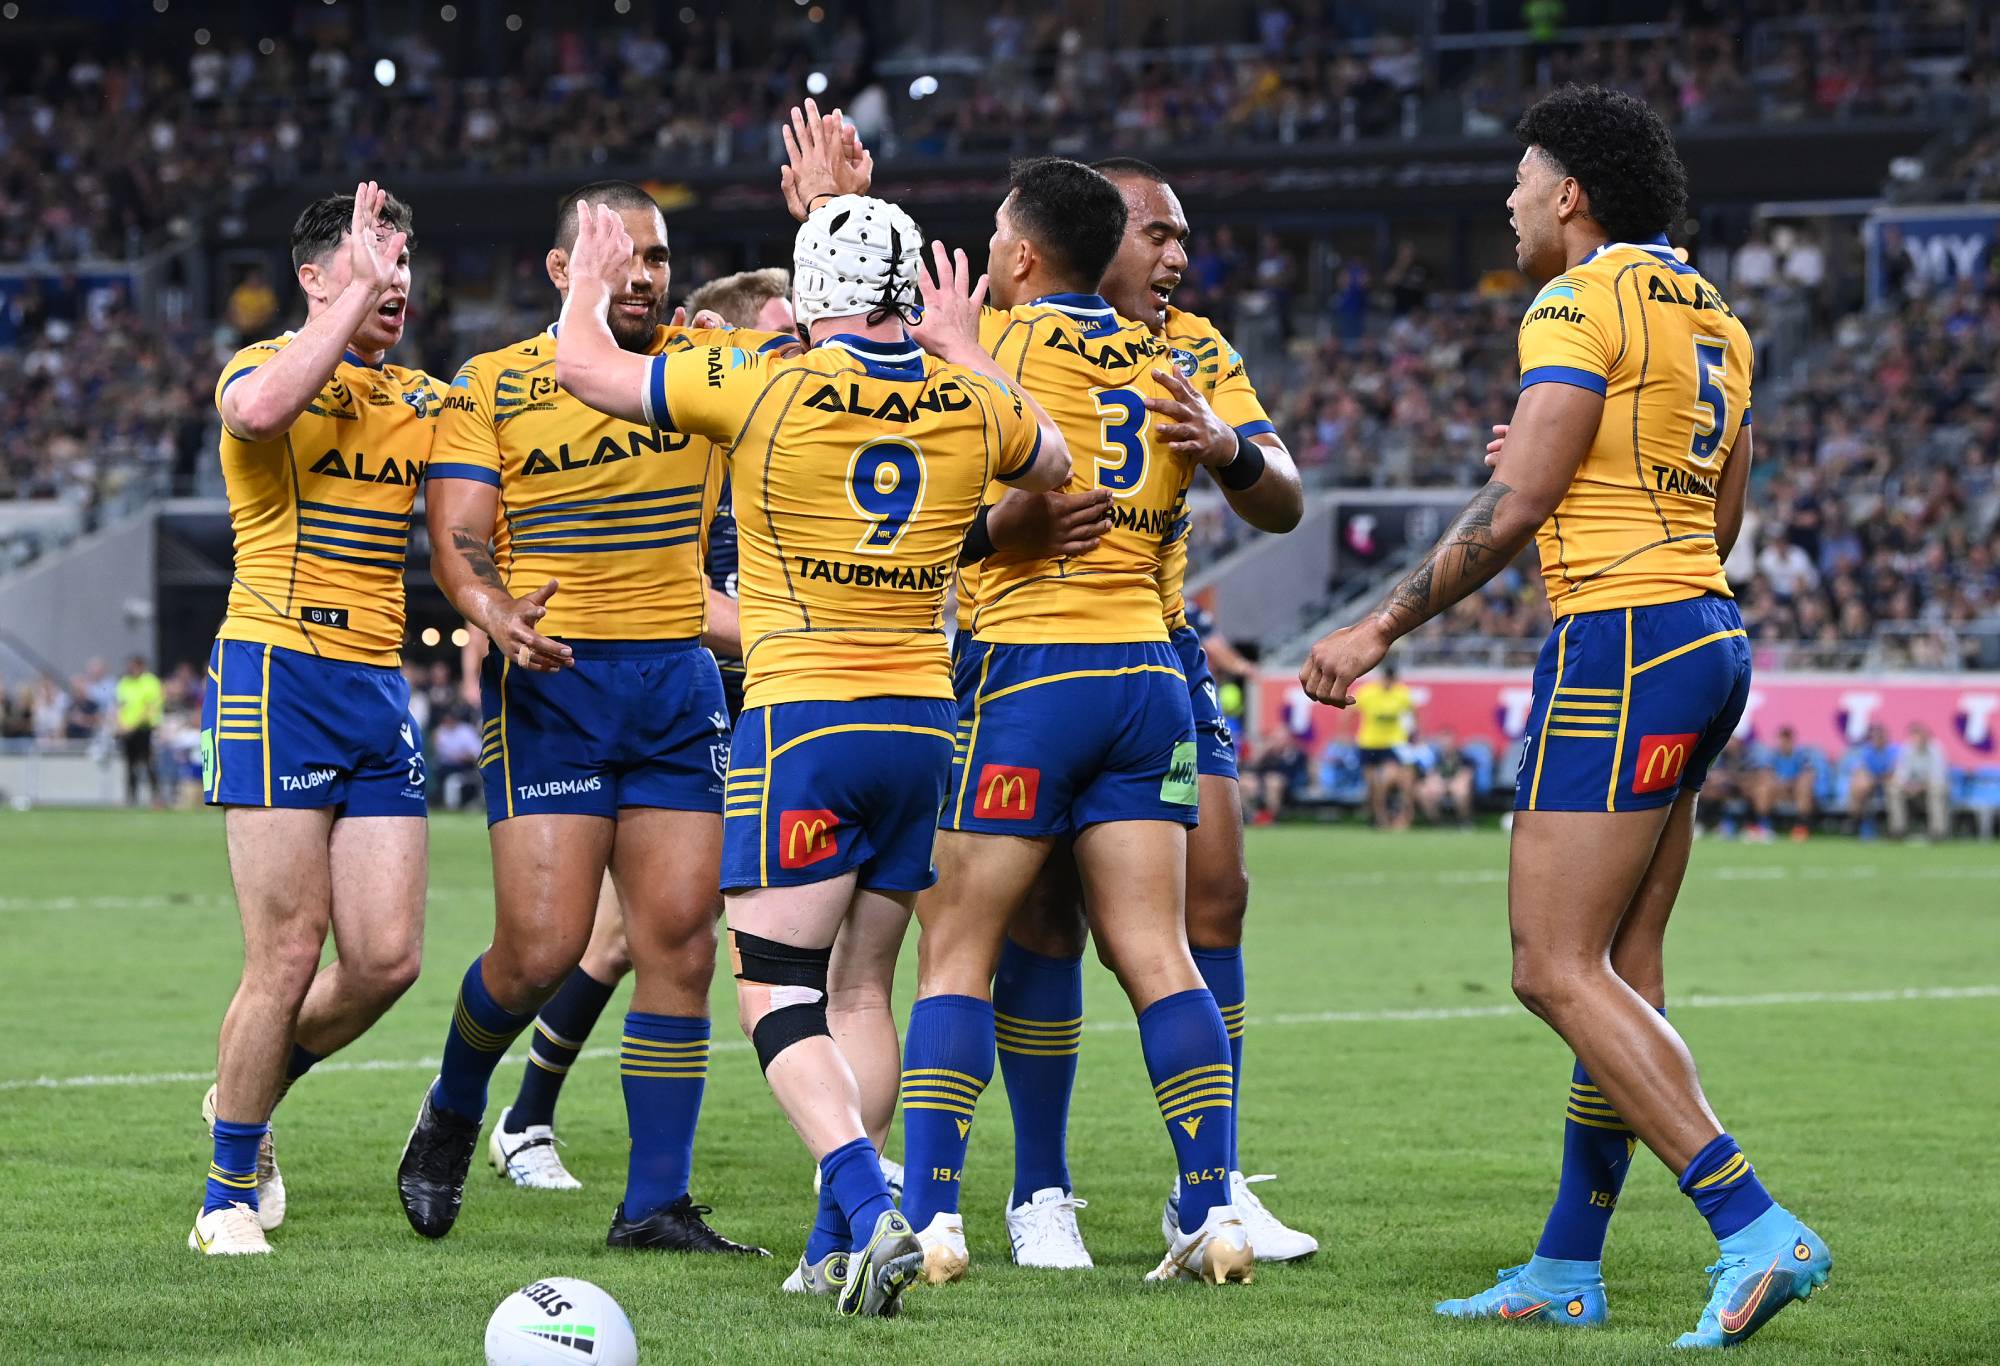 TOWNSVILLE, AUSTRALIA - SEPTEMBER 23: Eels celebrate a try by Will Penisini during the NRL Preliminary Final match between the North Queensland Cowboys and the Parramatta Eels at Queensland Country Bank Stadium on September 23, 2022 in Townsville, Australia. (Photo by Bradley Kanaris/Getty Images)